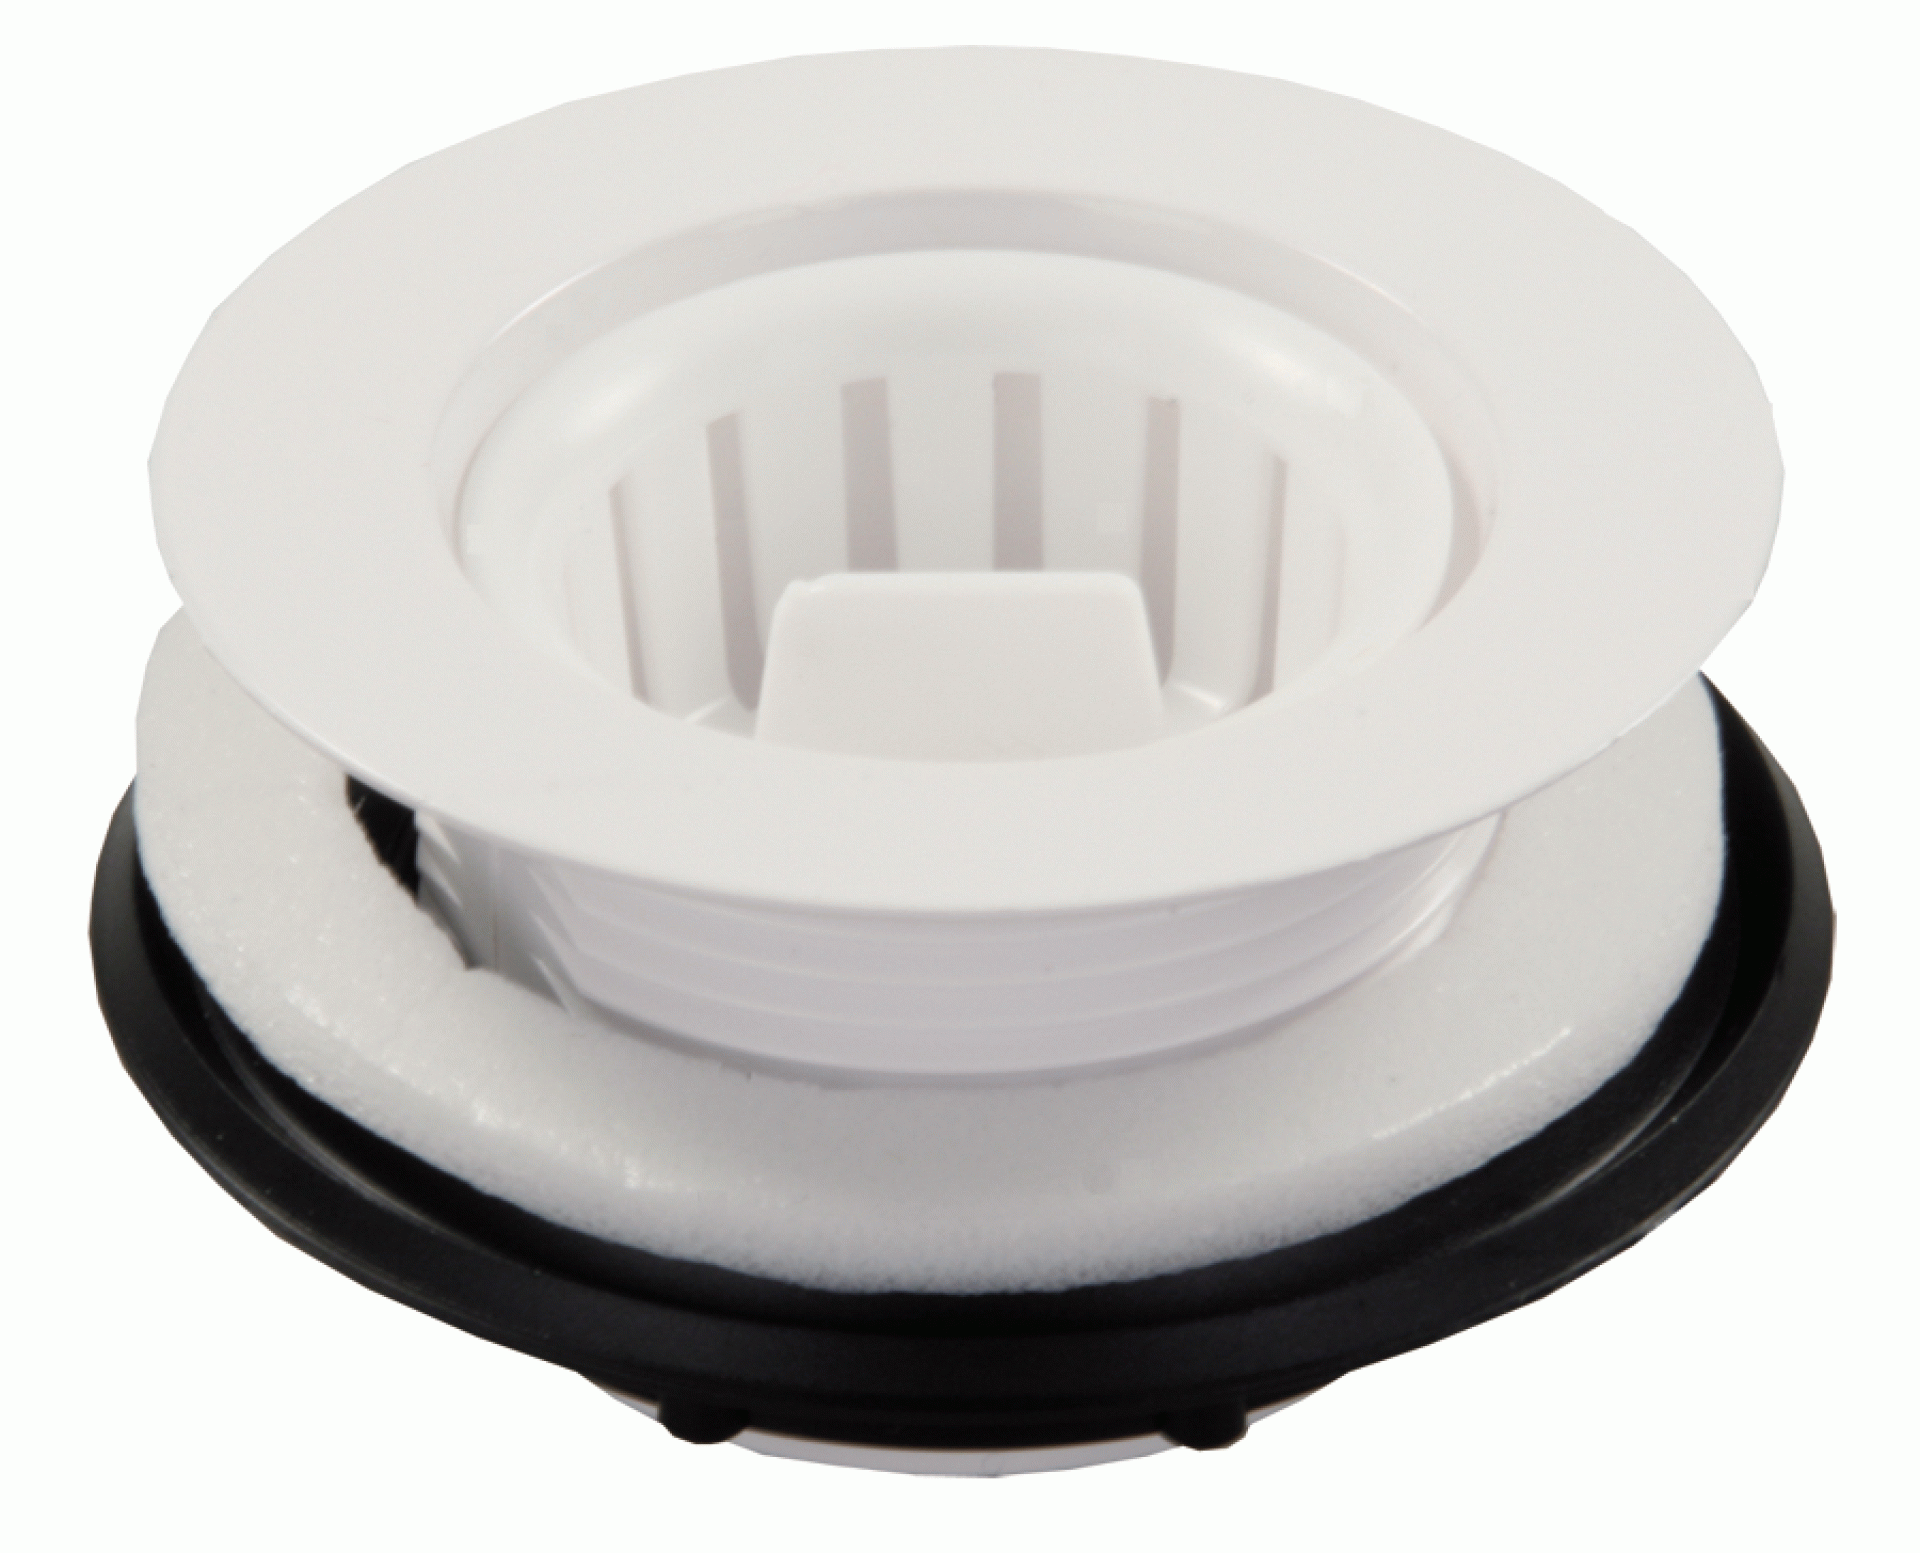 J R PRODUCTS | 95015 | STRAINER W/ THREADED BASKET - WHITE